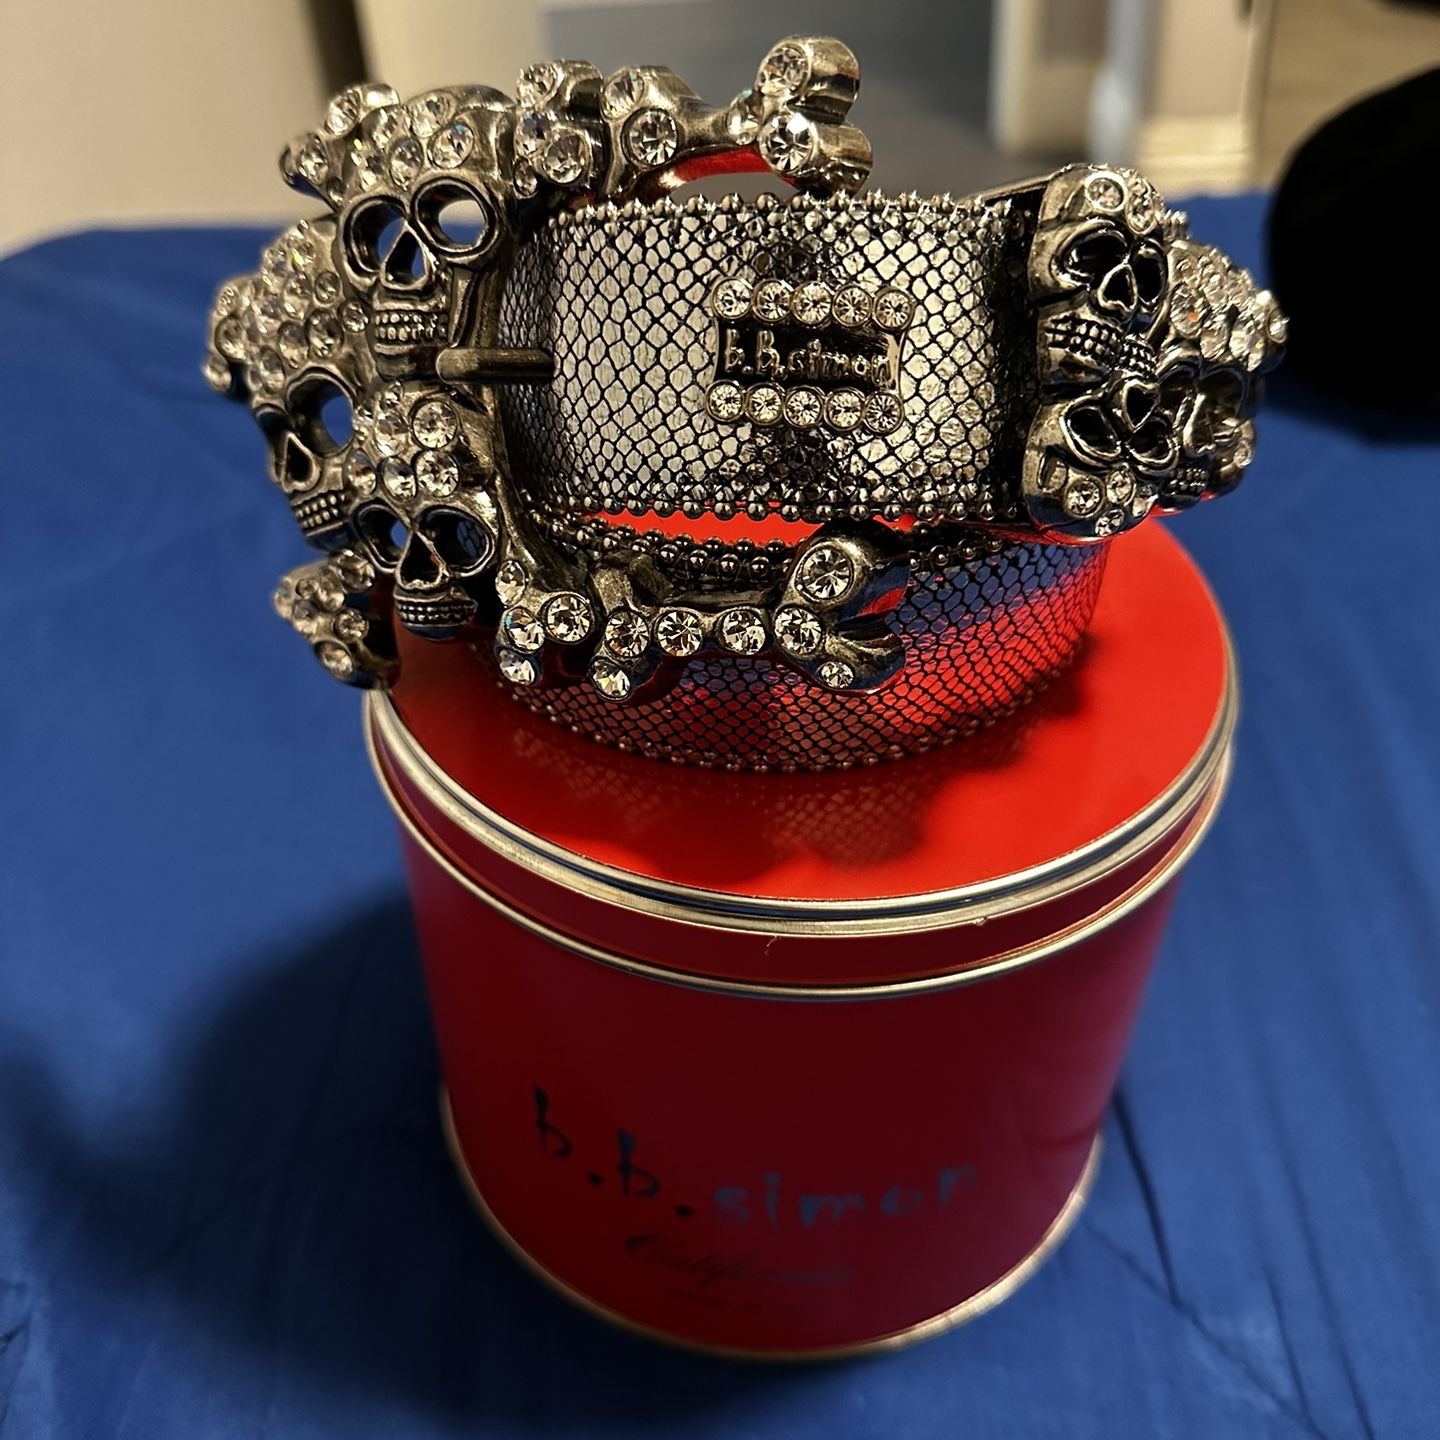 BB Simon Belt The Silver Skull Pile for Sale in Victorville, CA - OfferUp